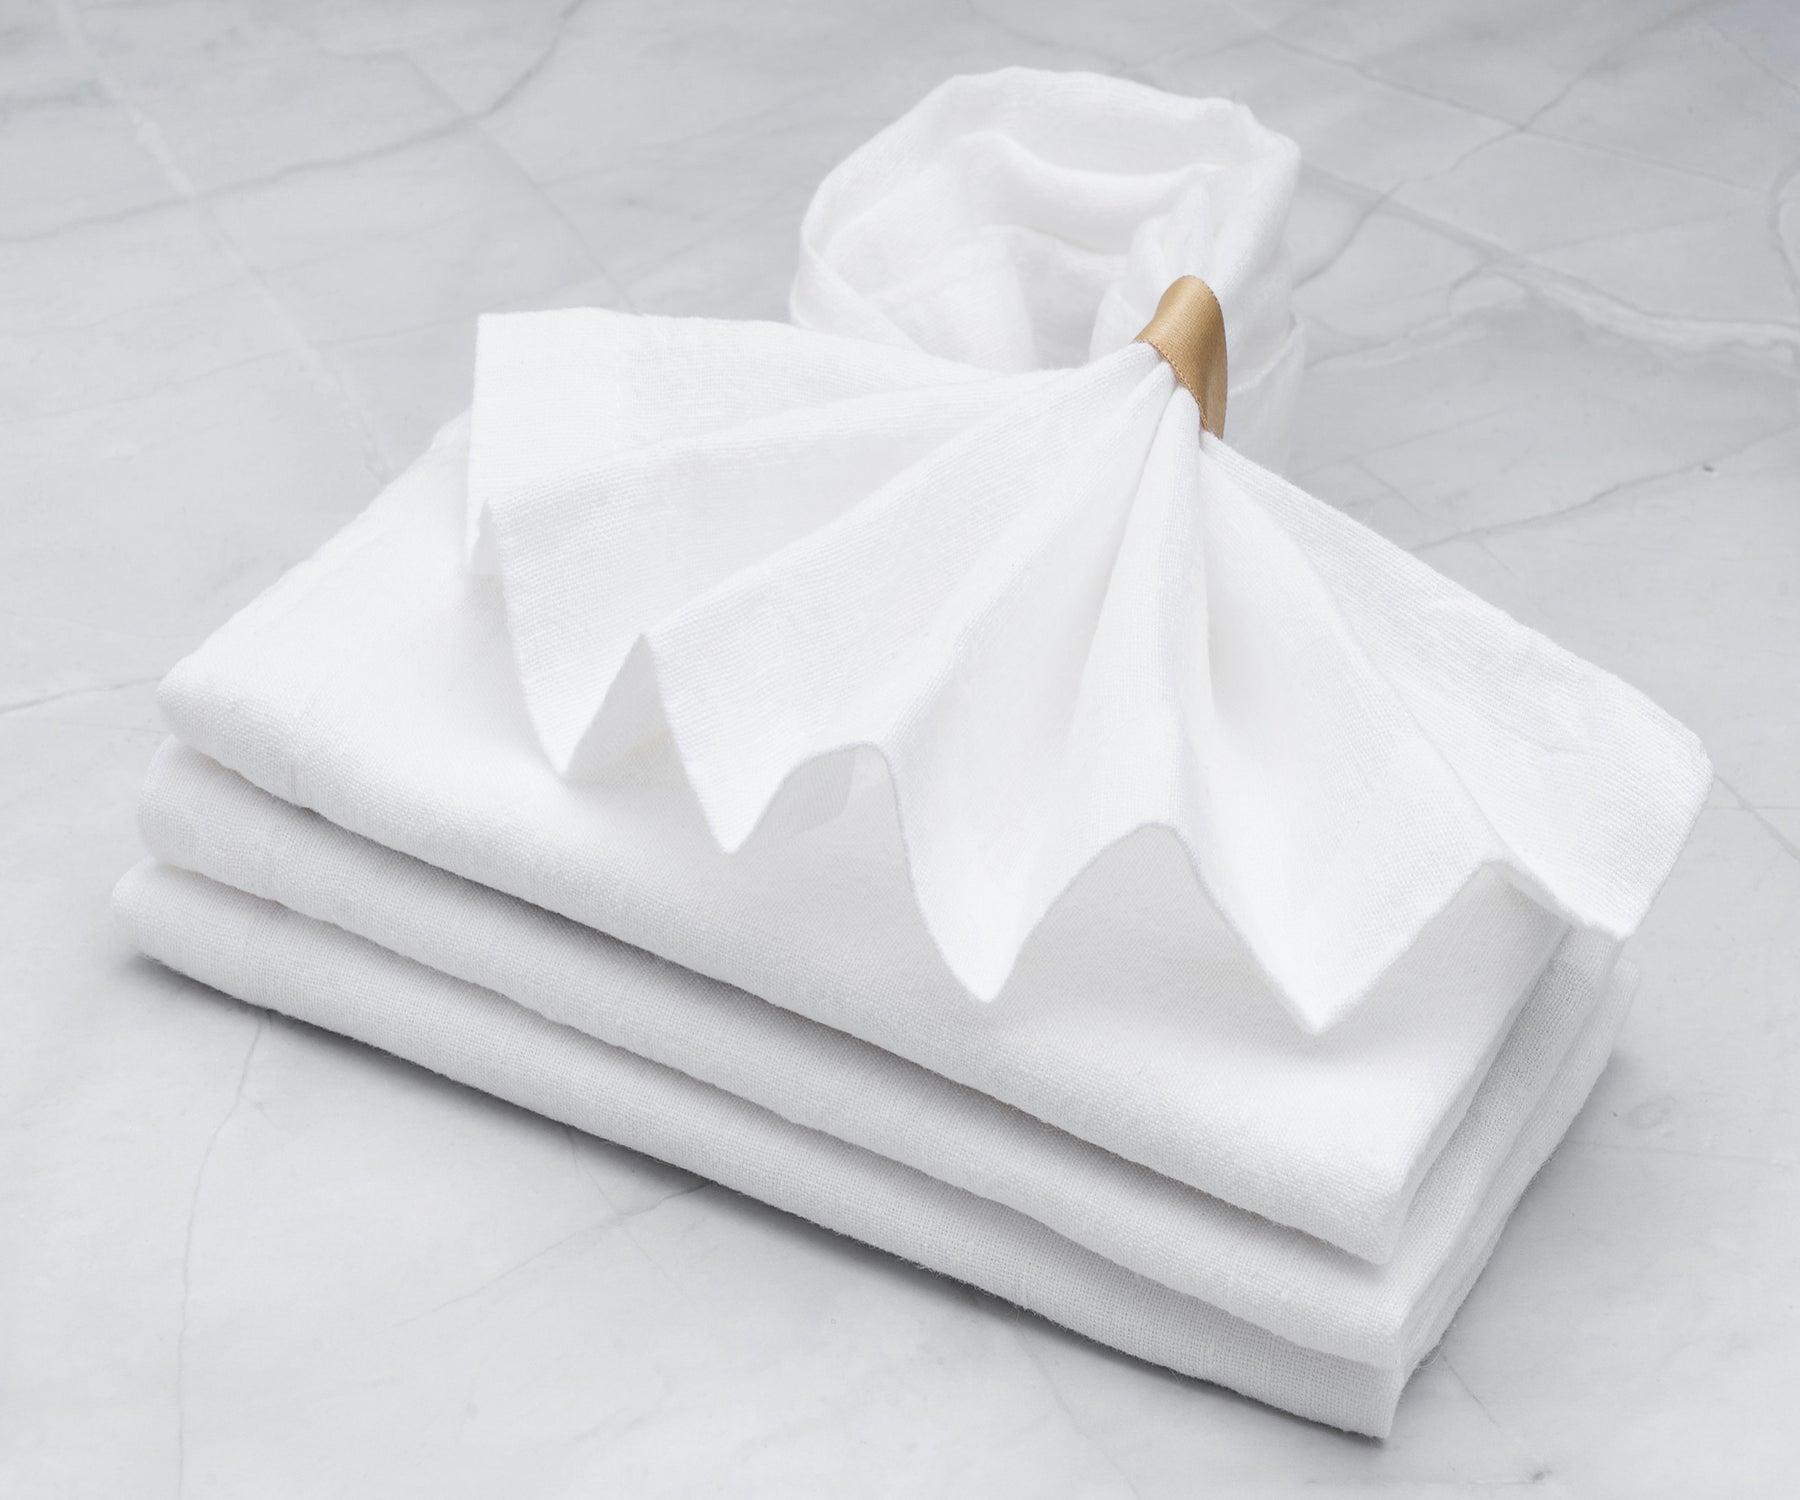 Neatly stacked white linen napkins on a marble countertop